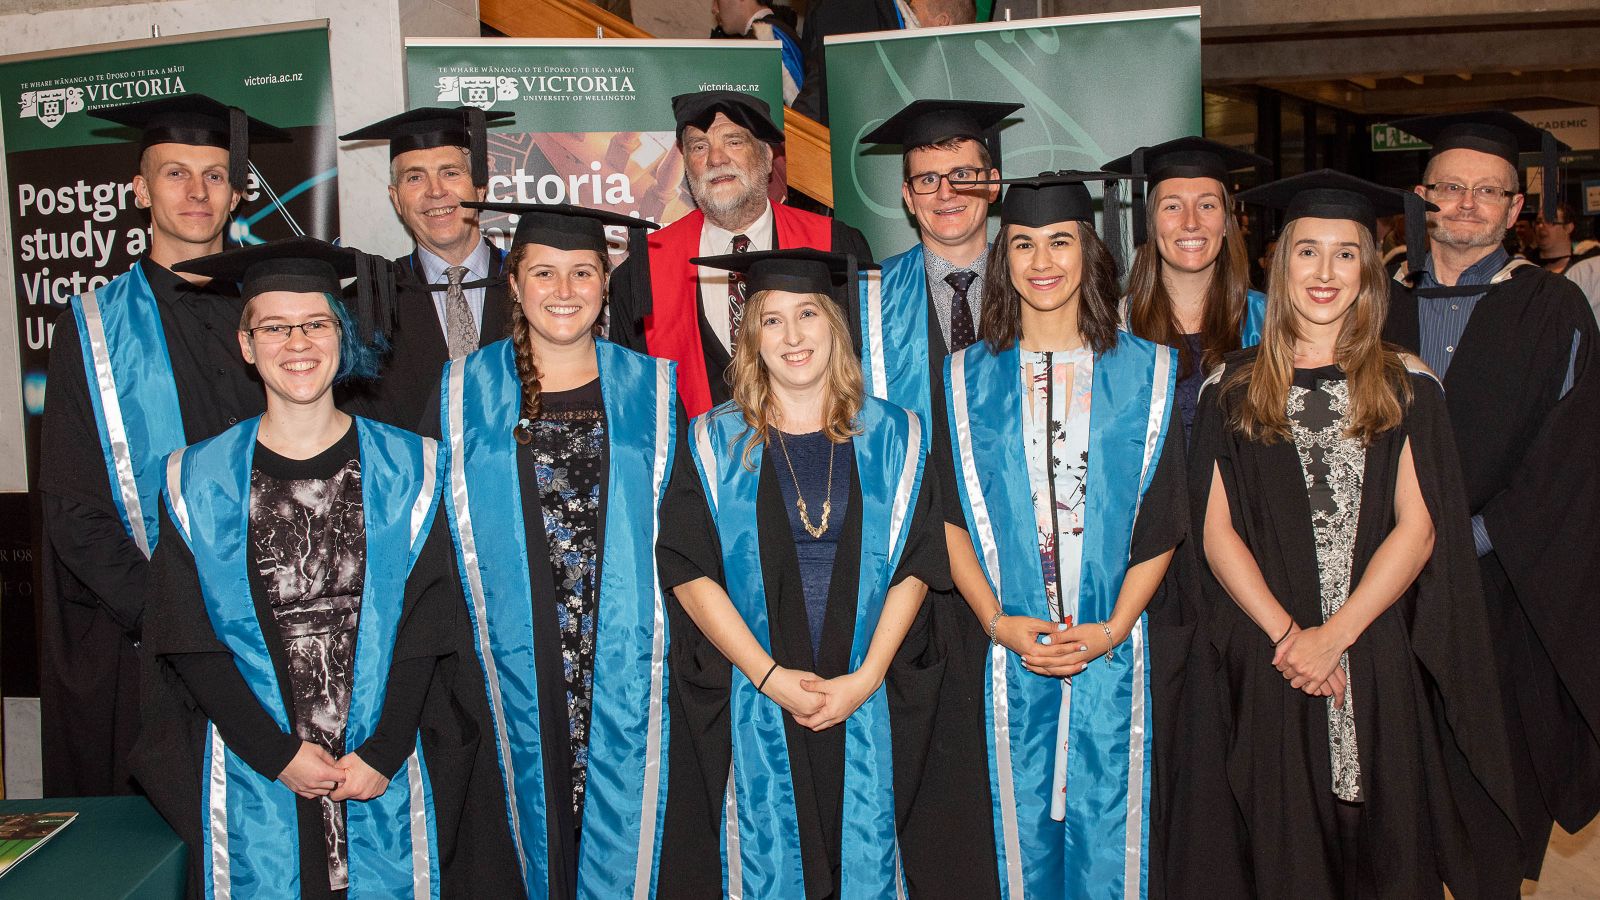 The eight meteorology graduates, wearing graduation gowns and caps, stand in front of Victoria banners with the MetService CEO and the Programme Director. Back row: Lewis Ferris, Peter Lennox (MetService CEO), James McGregor (Programme Director), Andrew James, Ashlee Parkes, Chris Webster (from MetService) Front row: Melissa Oosterwijk, Jessie Owen, Juliane Bergdolt, Tahlia Crabtree, Kathryn Boorman.